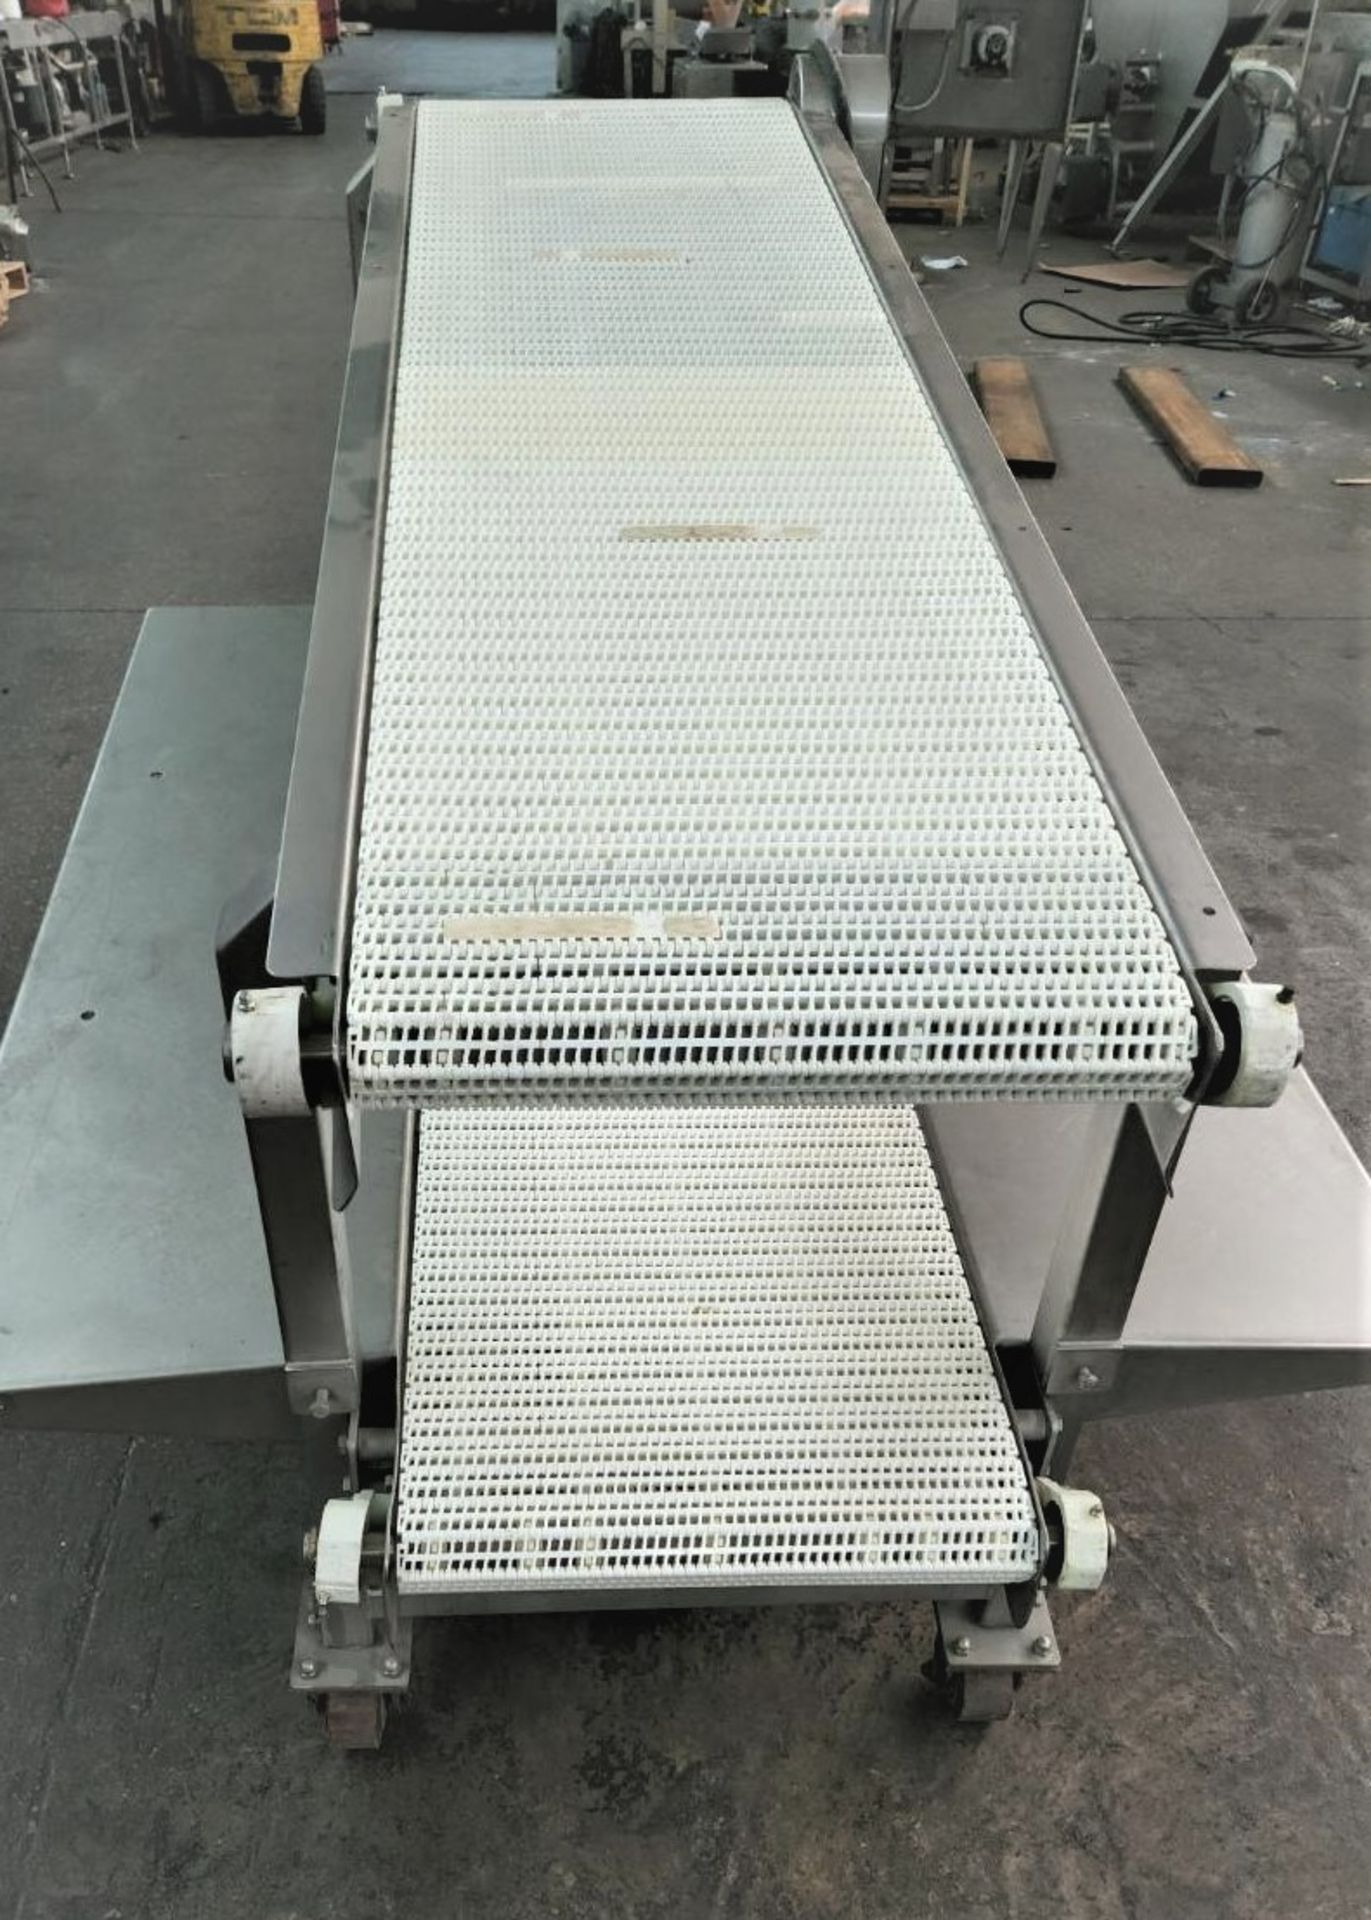 Dual 18" White Intralox Belt Conveyor Pack Off S/S Conveyor, Both Belts are 18" W x 72' Long, Tables - Image 5 of 5